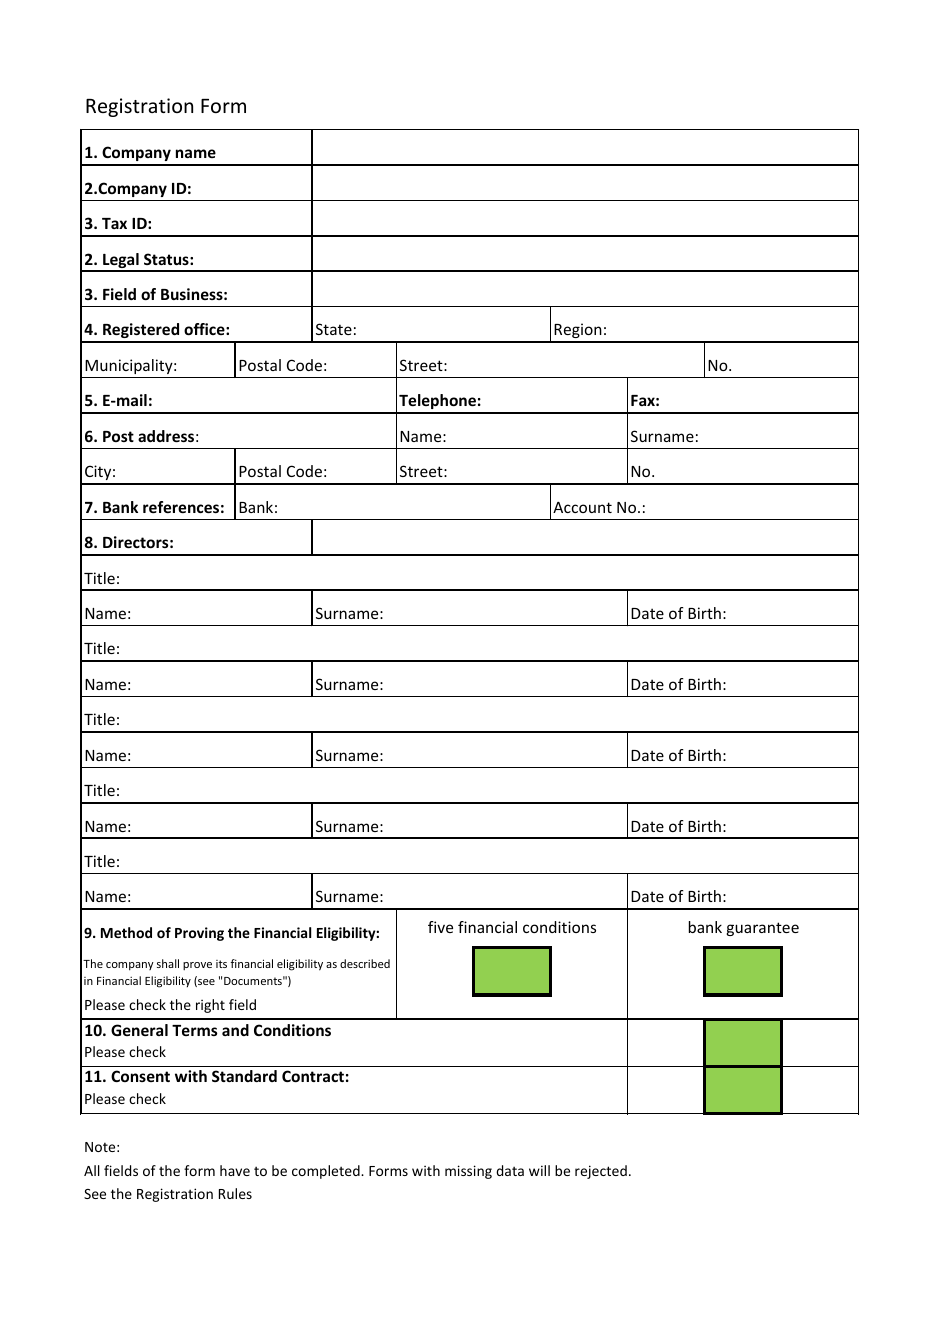 Company Registration Form, Page 1